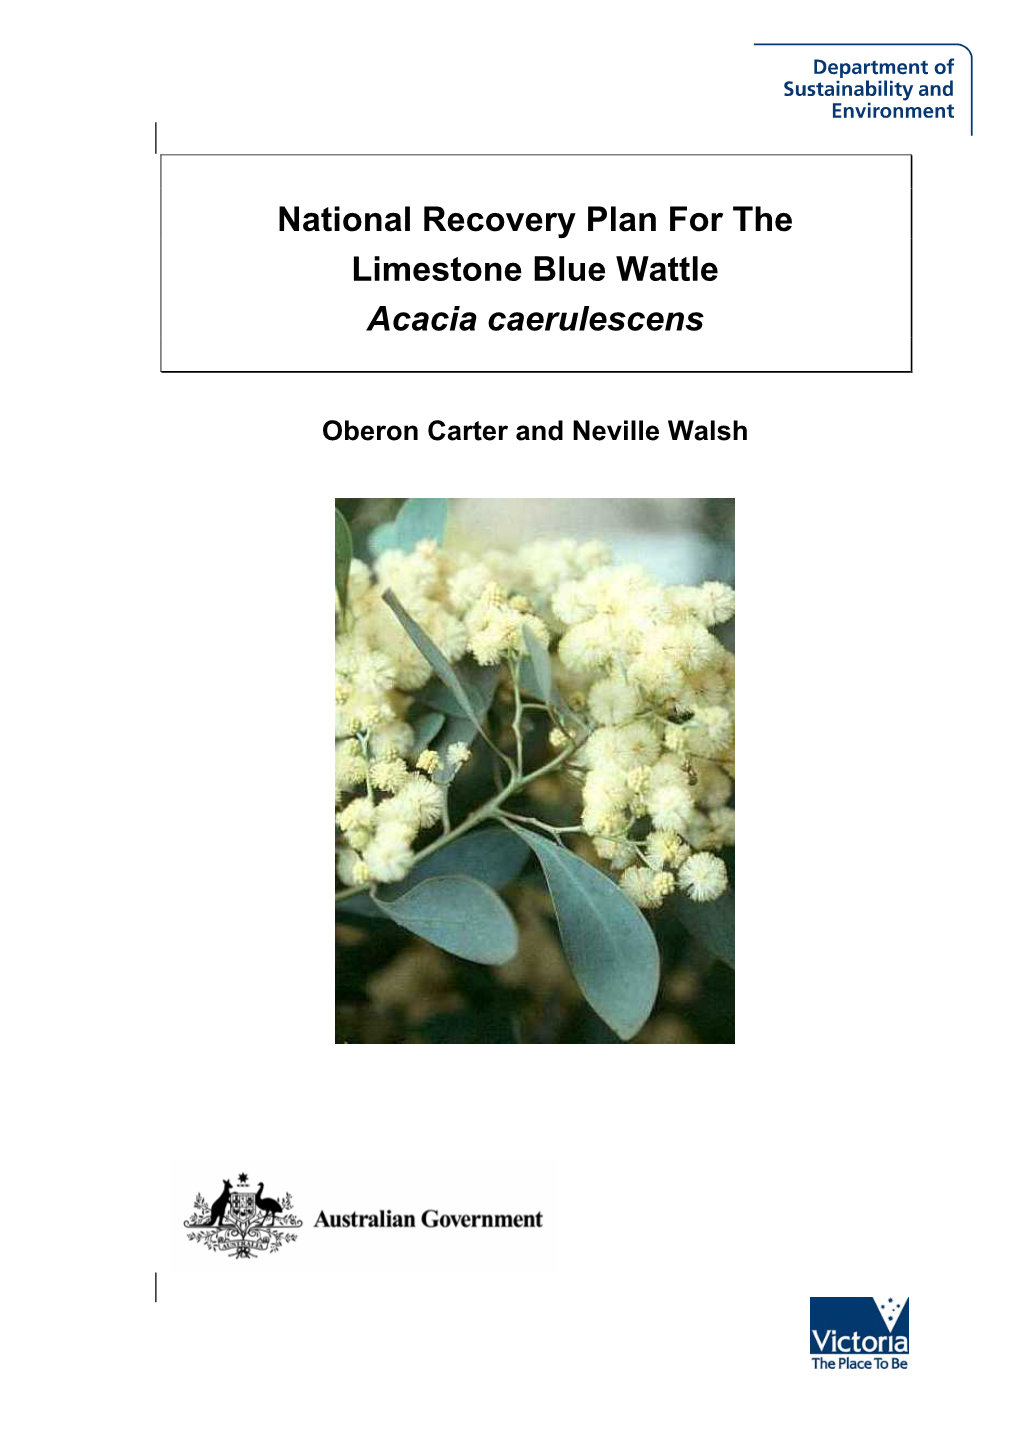 National Recovery Plan for the Limestone Blue Wattle Acacia Caerulescens